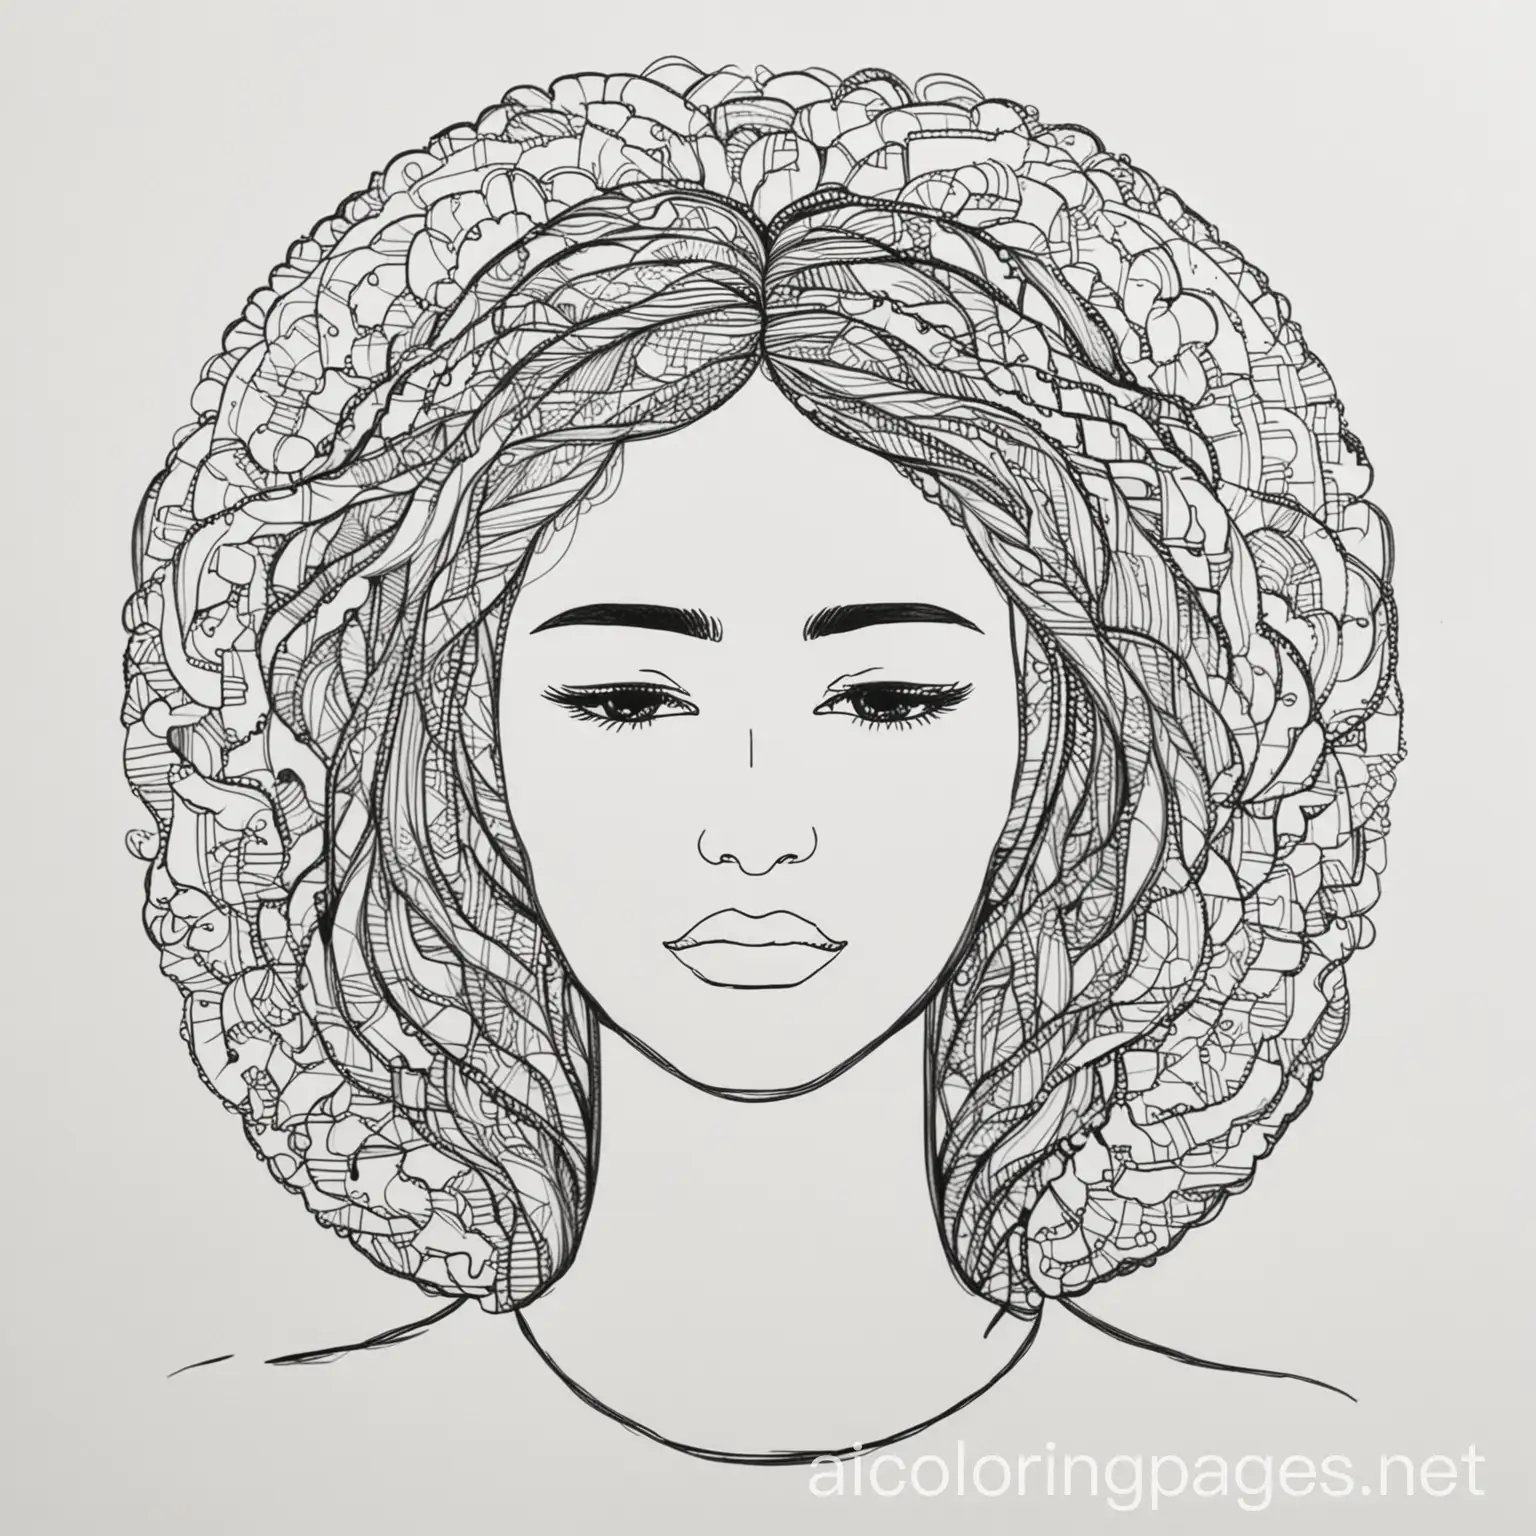 Mental health, Coloring Page, black and white, line art, white background, Simplicity, Ample White Space. The background of the coloring page is plain white to make it easy for young children to color within the lines. The outlines of all the subjects are easy to distinguish, making it simple for kids to color without too much difficulty